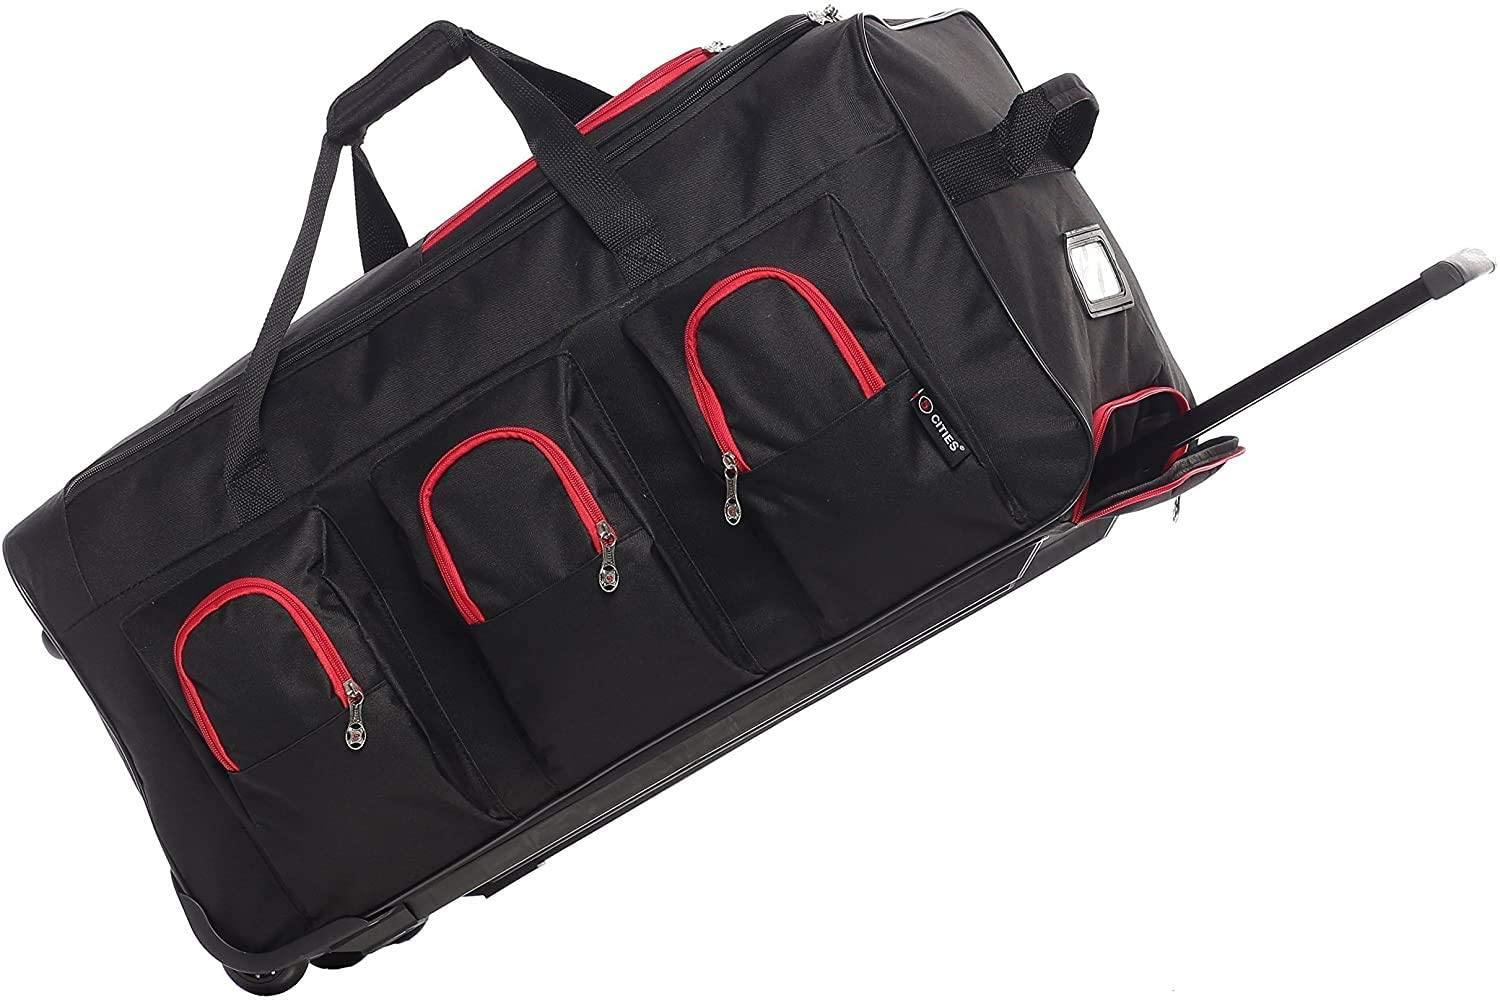 holdall travel bag with wheels